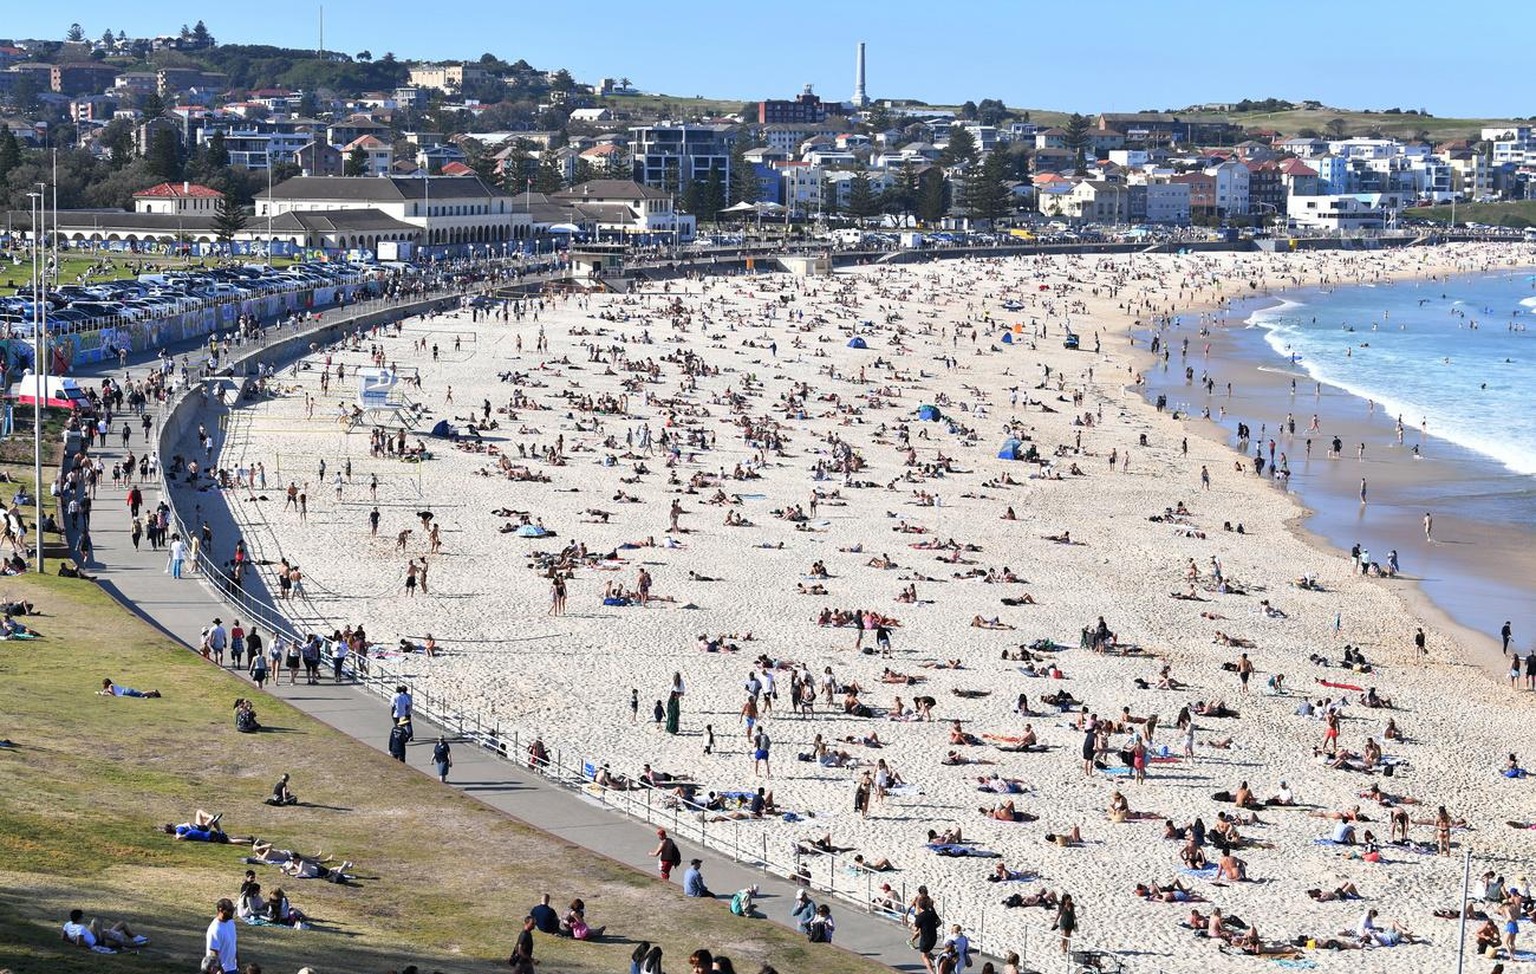 epa08634974 People crowd Bondi Beach as warm weather returns to the east coast of Australia in Sydney, Australia, 30 August 2020. Australia has reached another two pandemic milestones, recording its 6 ...